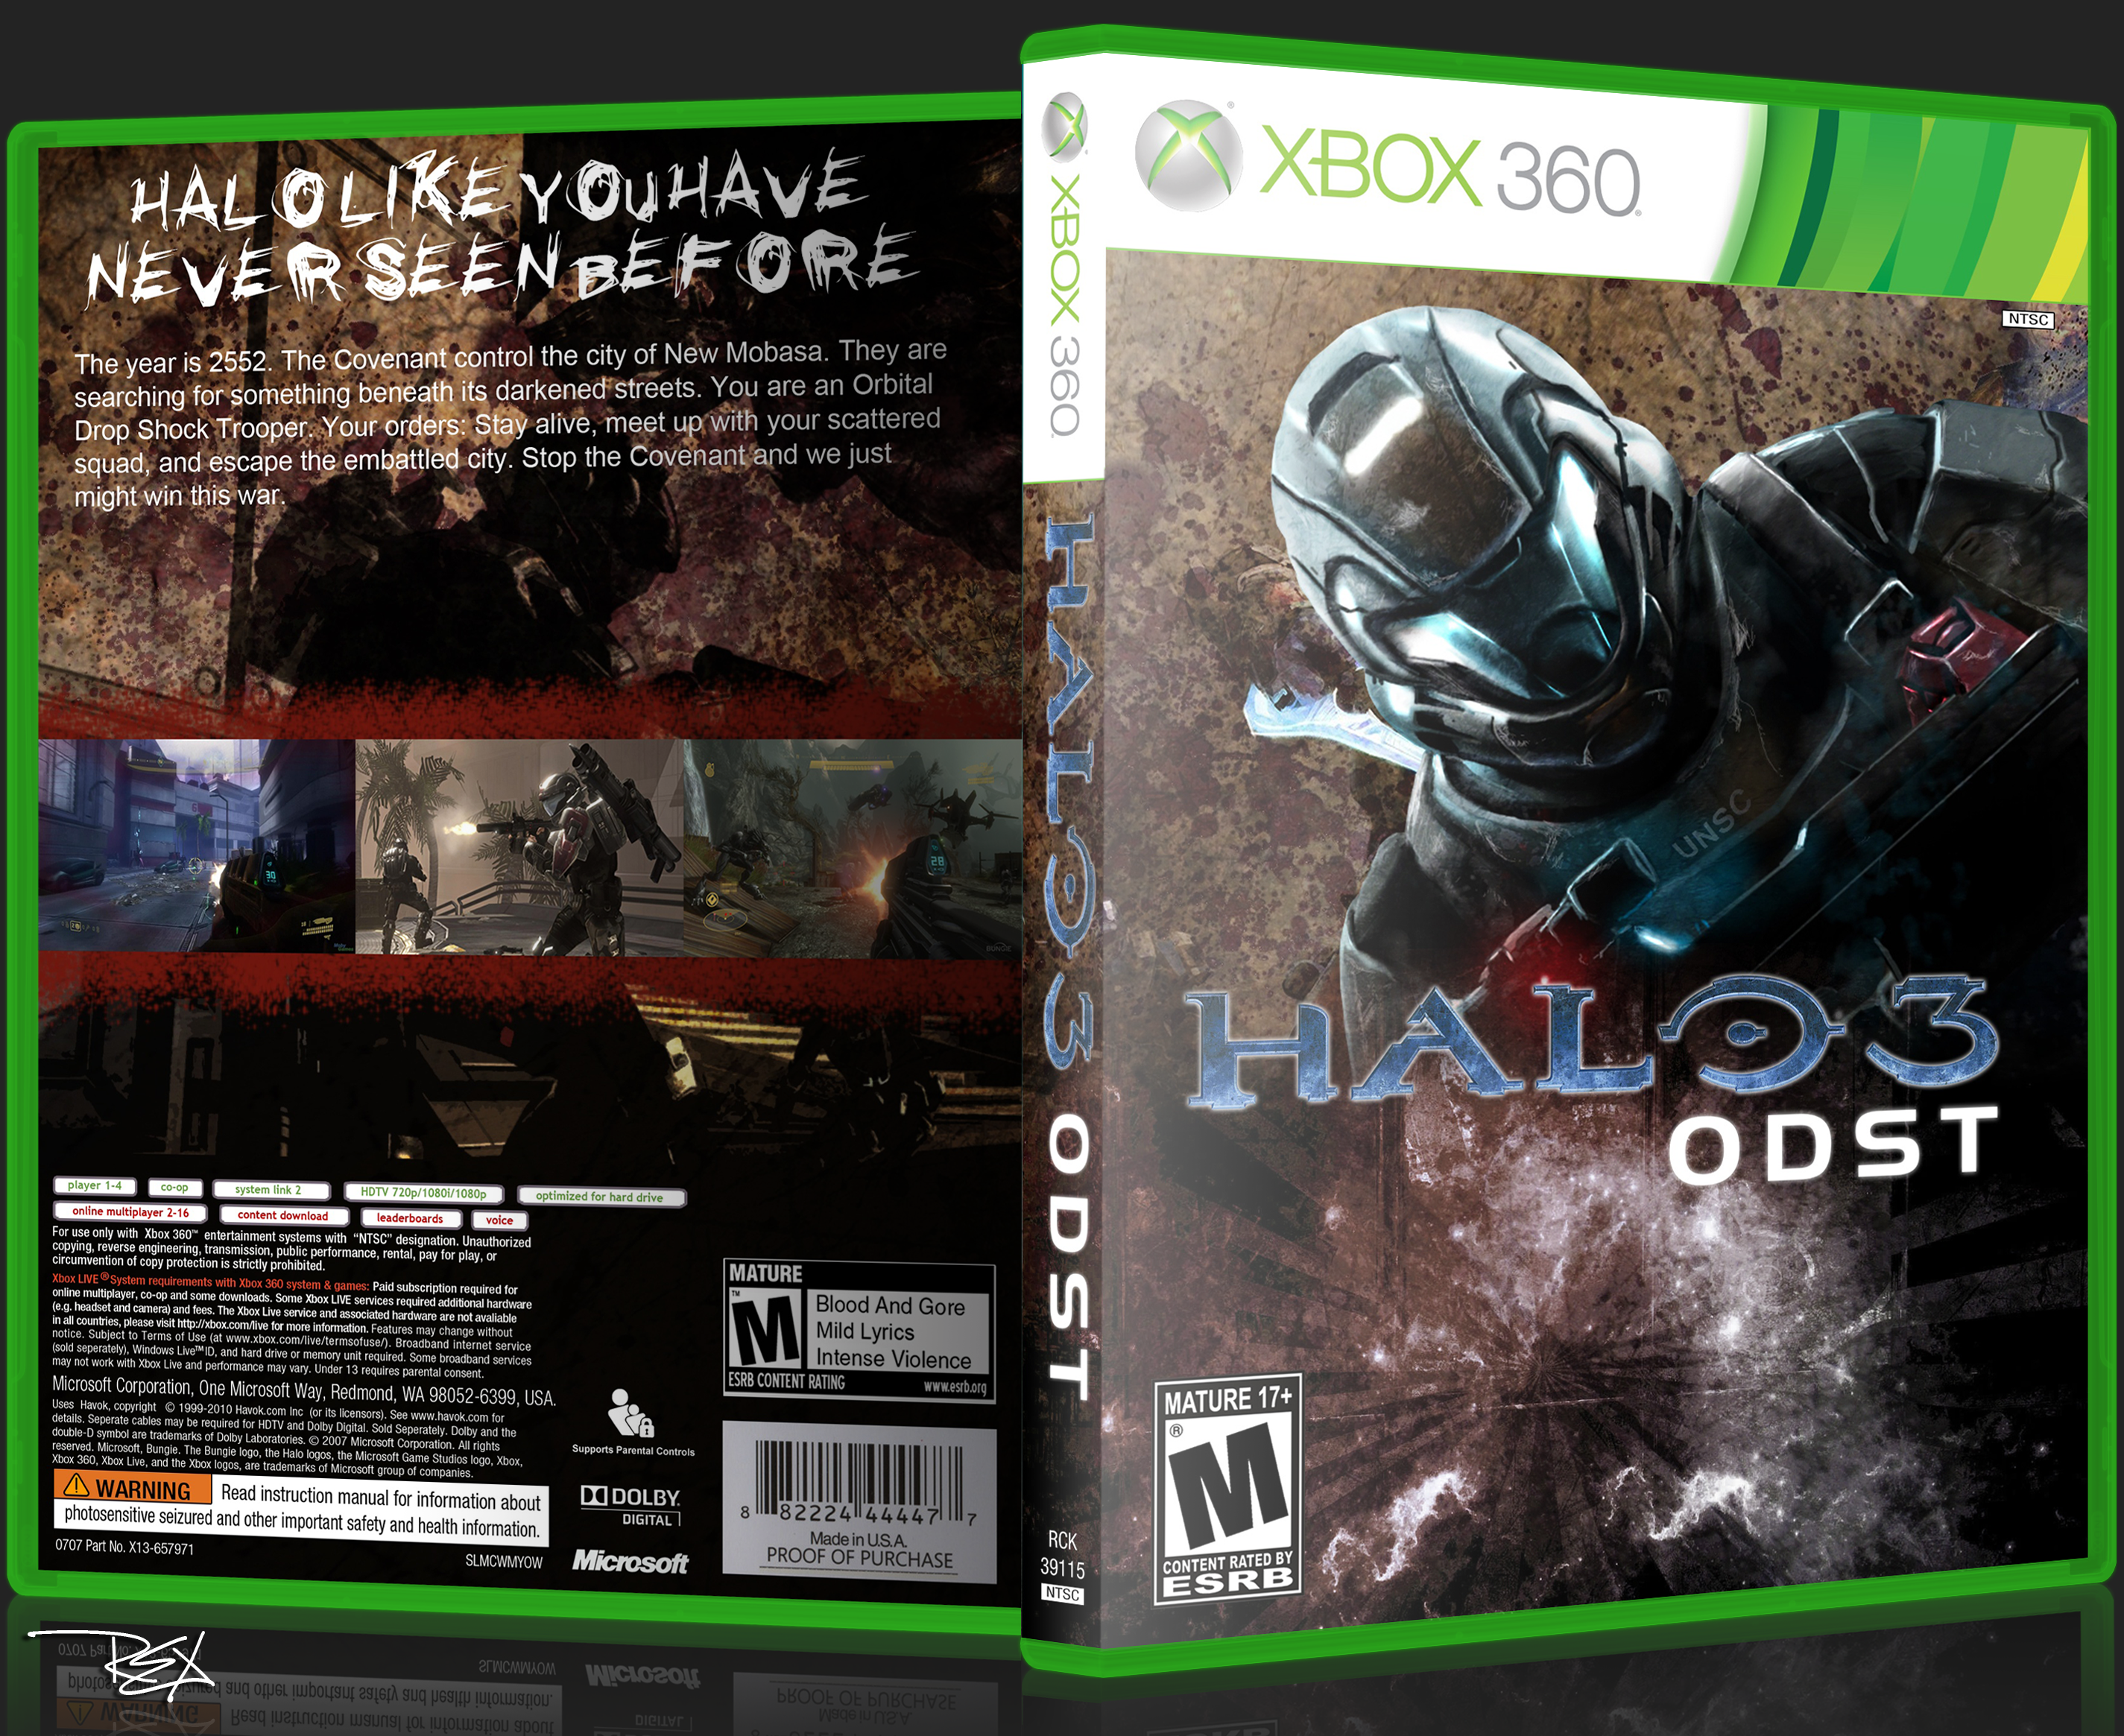 Halo 3 ODST box cover